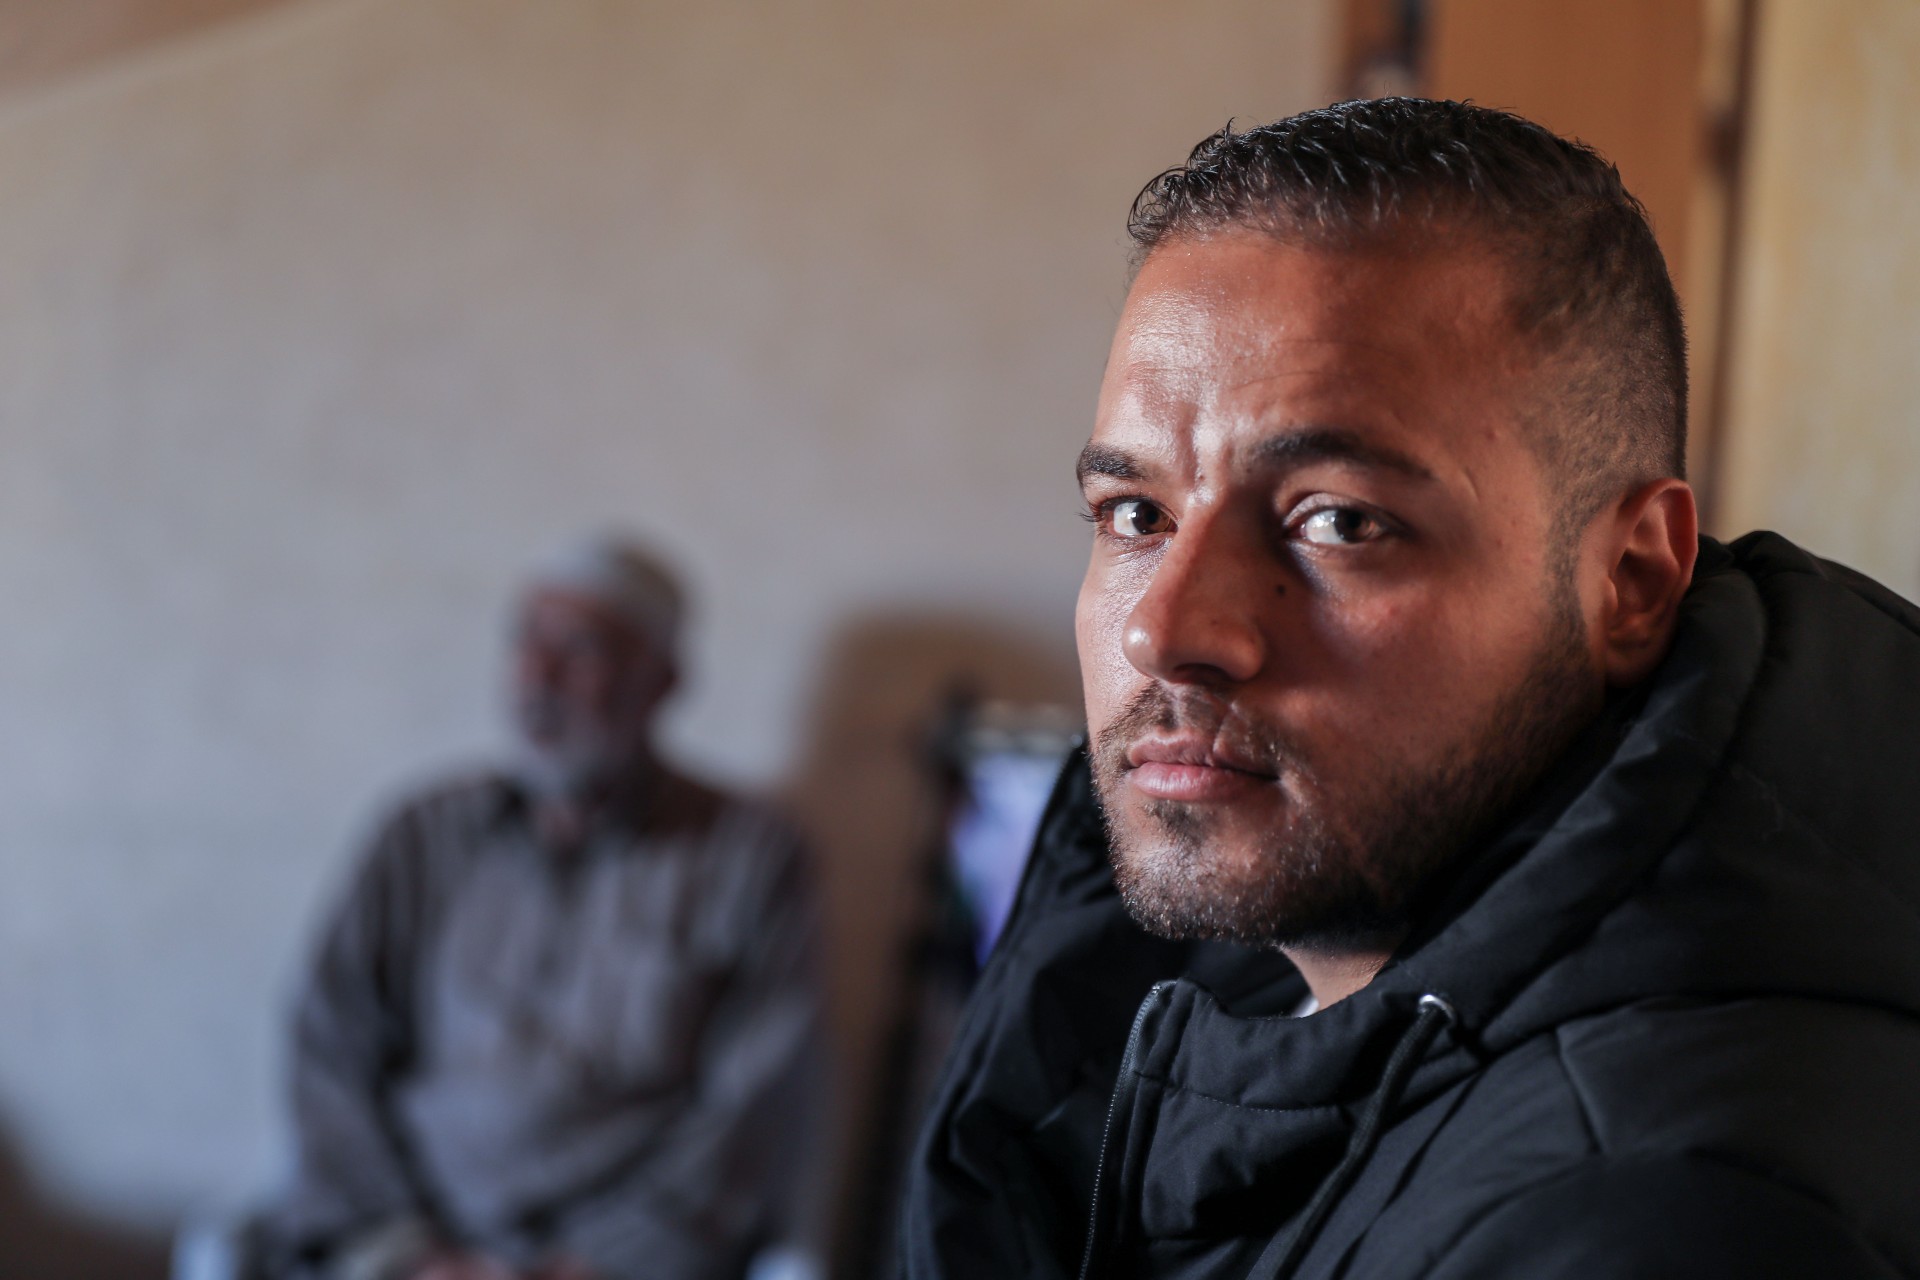 Yahya Barbakh, who survived a shipwreck, is now back in Gaza (MEE/Mohammed Hajjar)